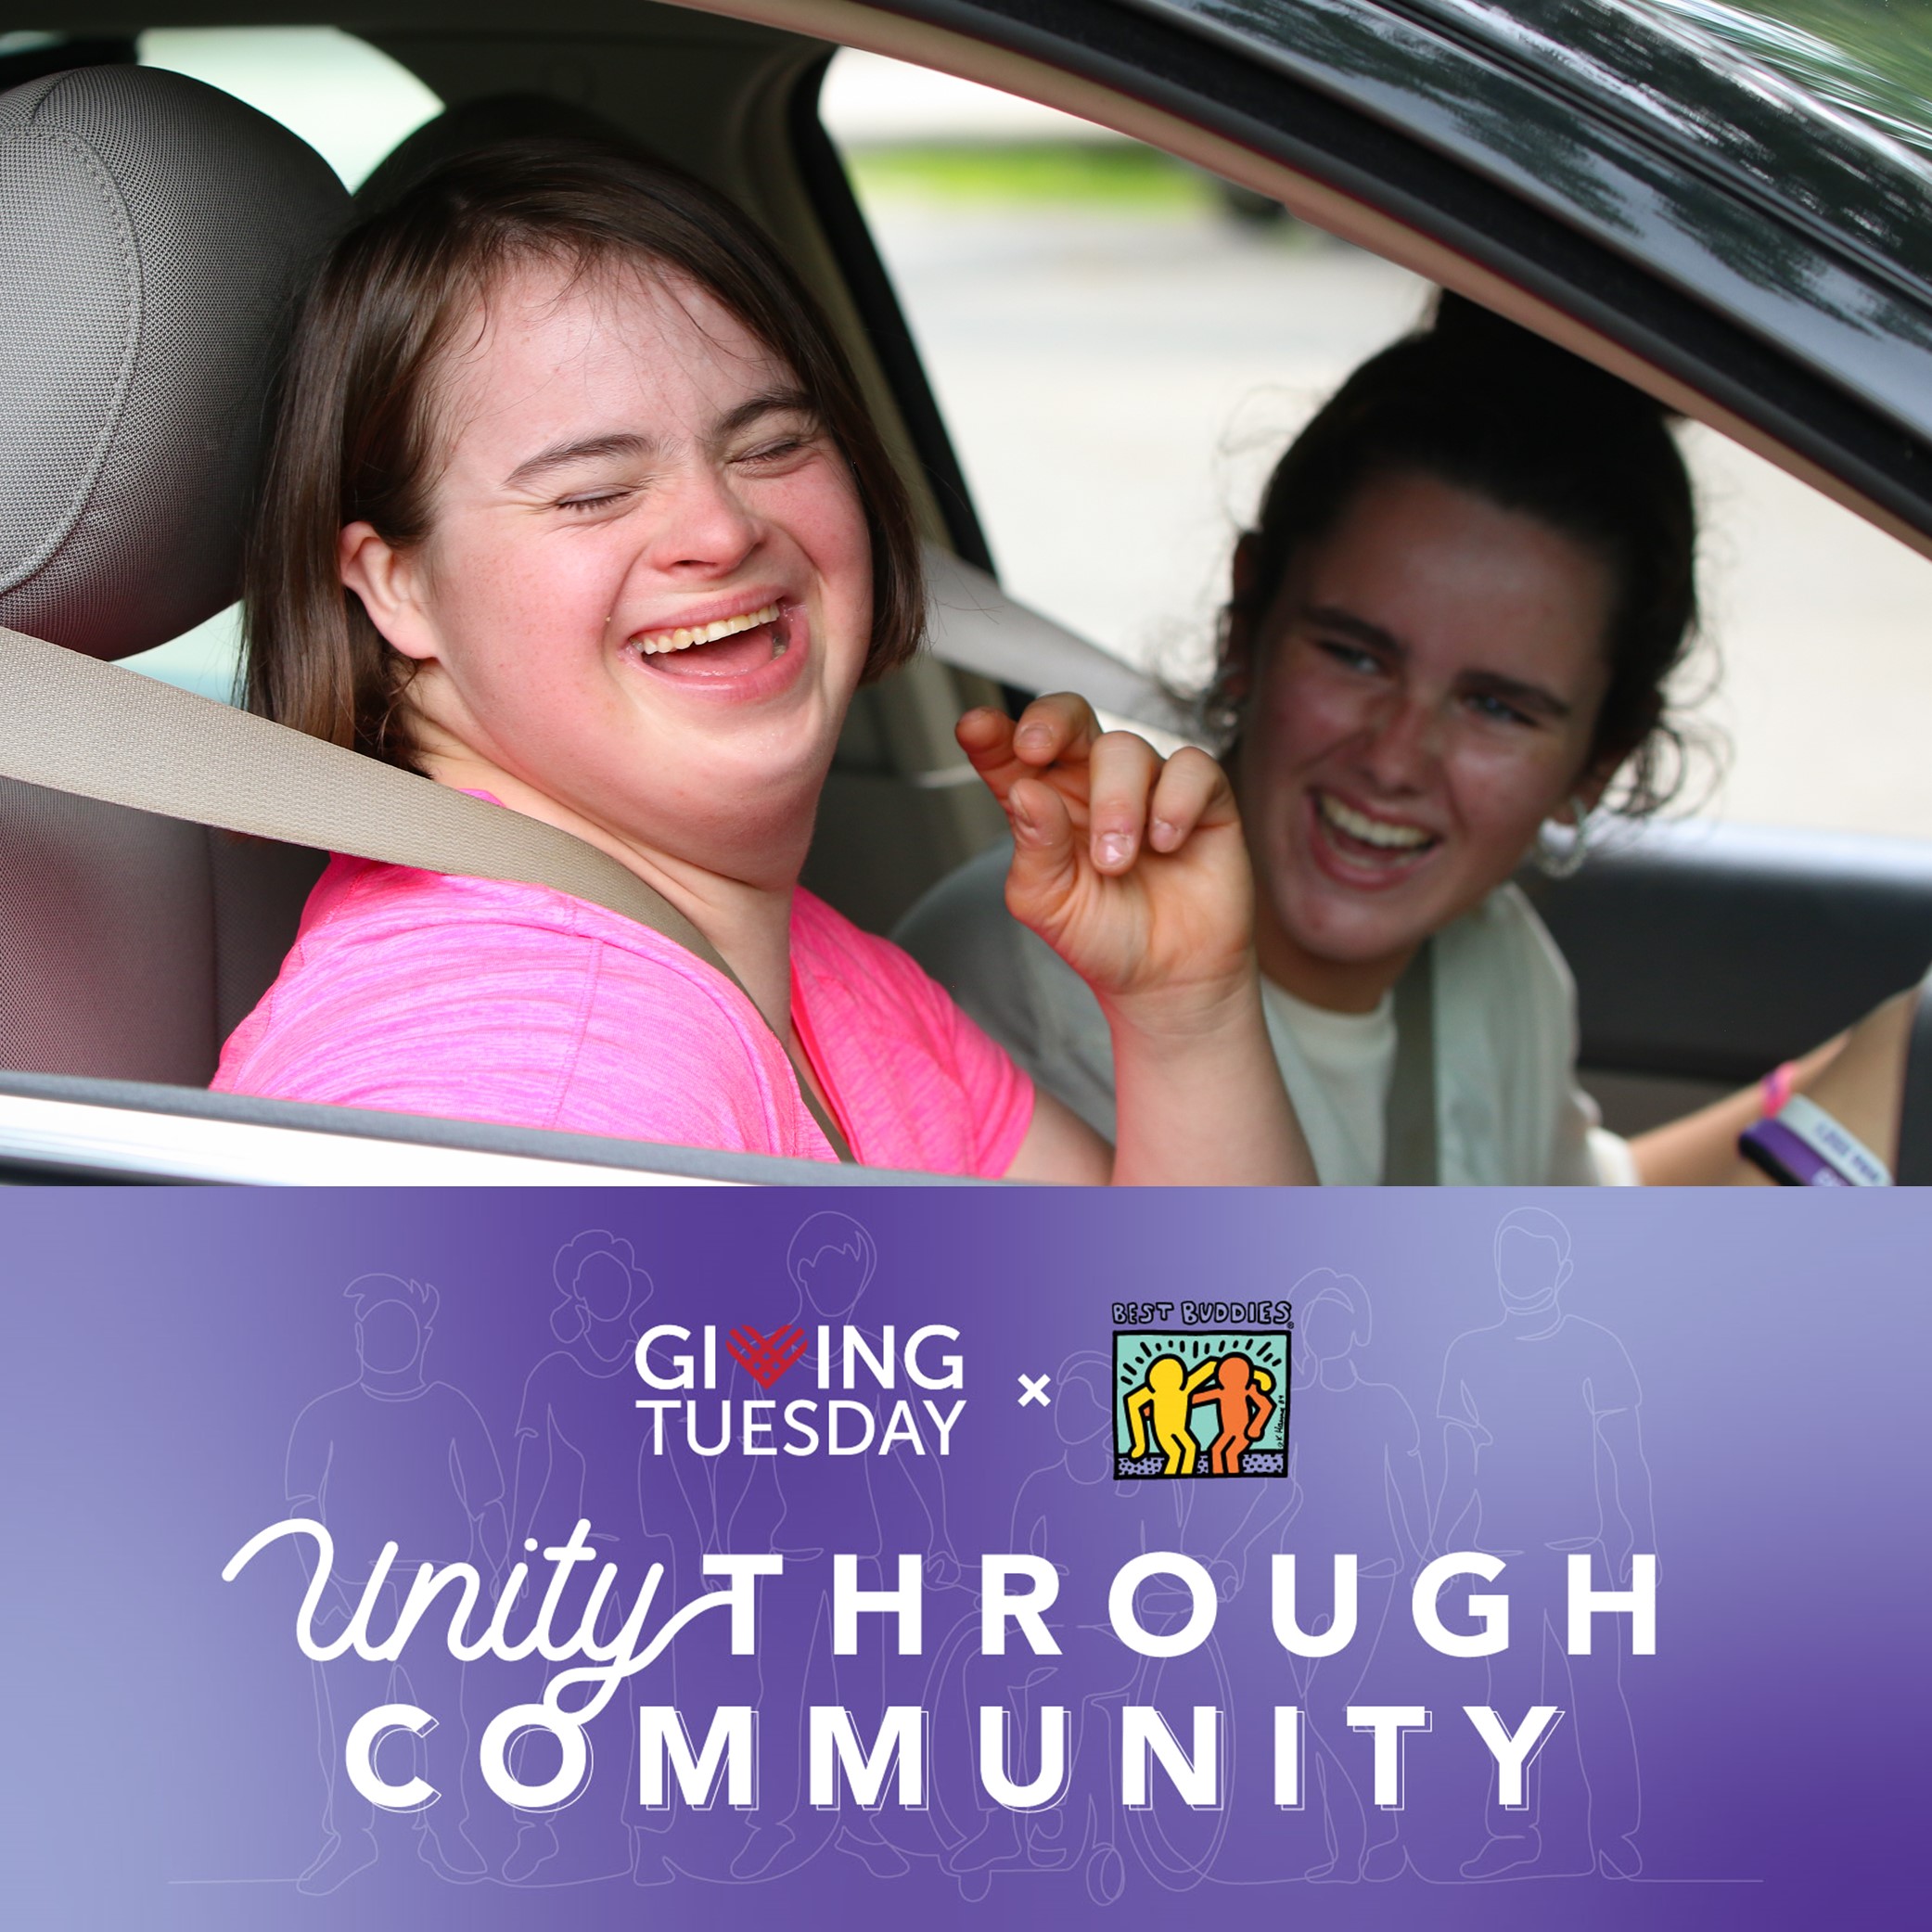 2 female Best Buddies Friendship participants enjoy riding in a car with the windows down and the music up.